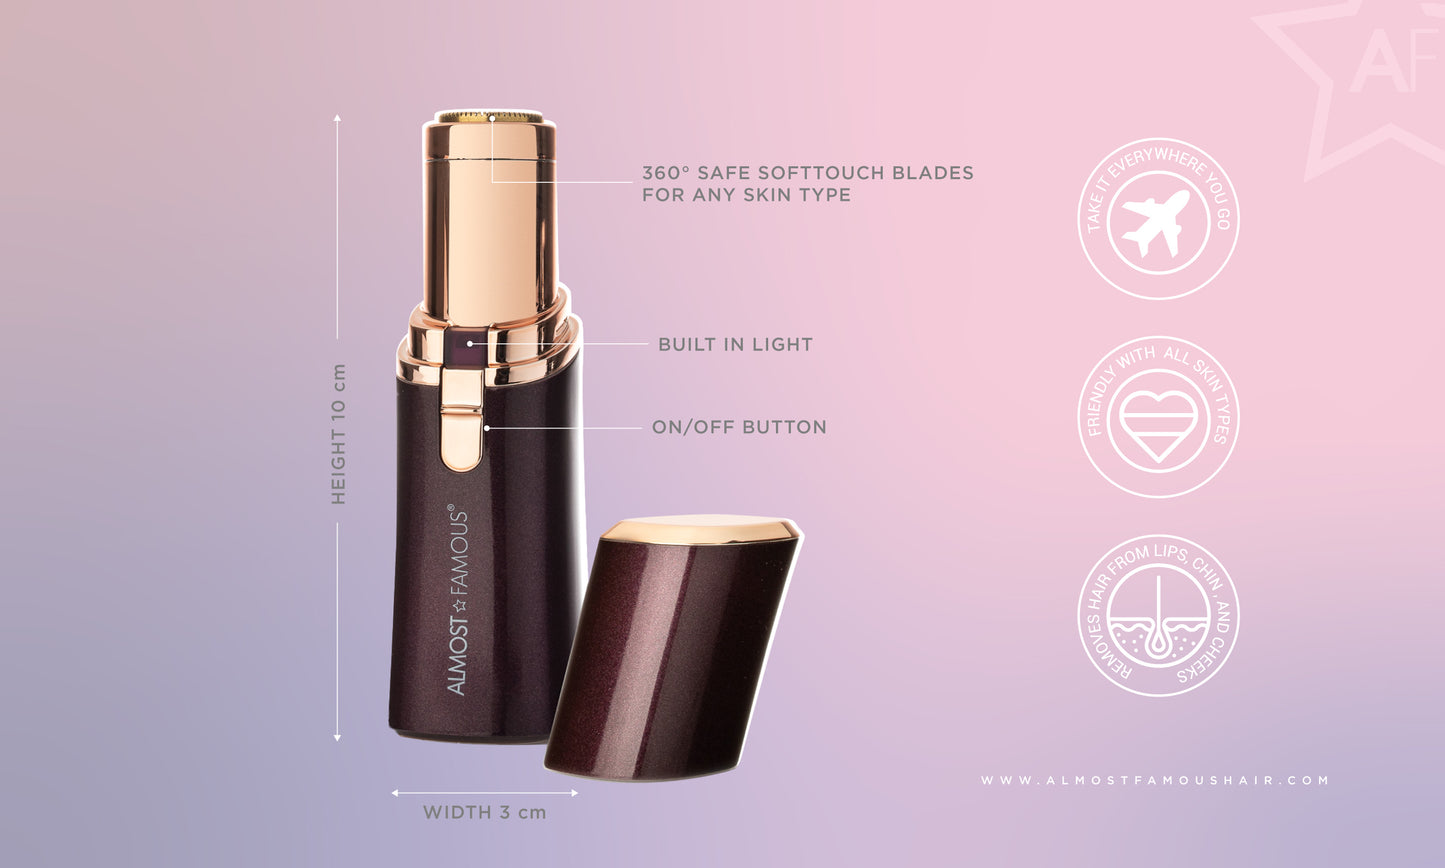 Almost Famous "Buzz It" Shaving facial wand with Rose Gold accents - HAB 